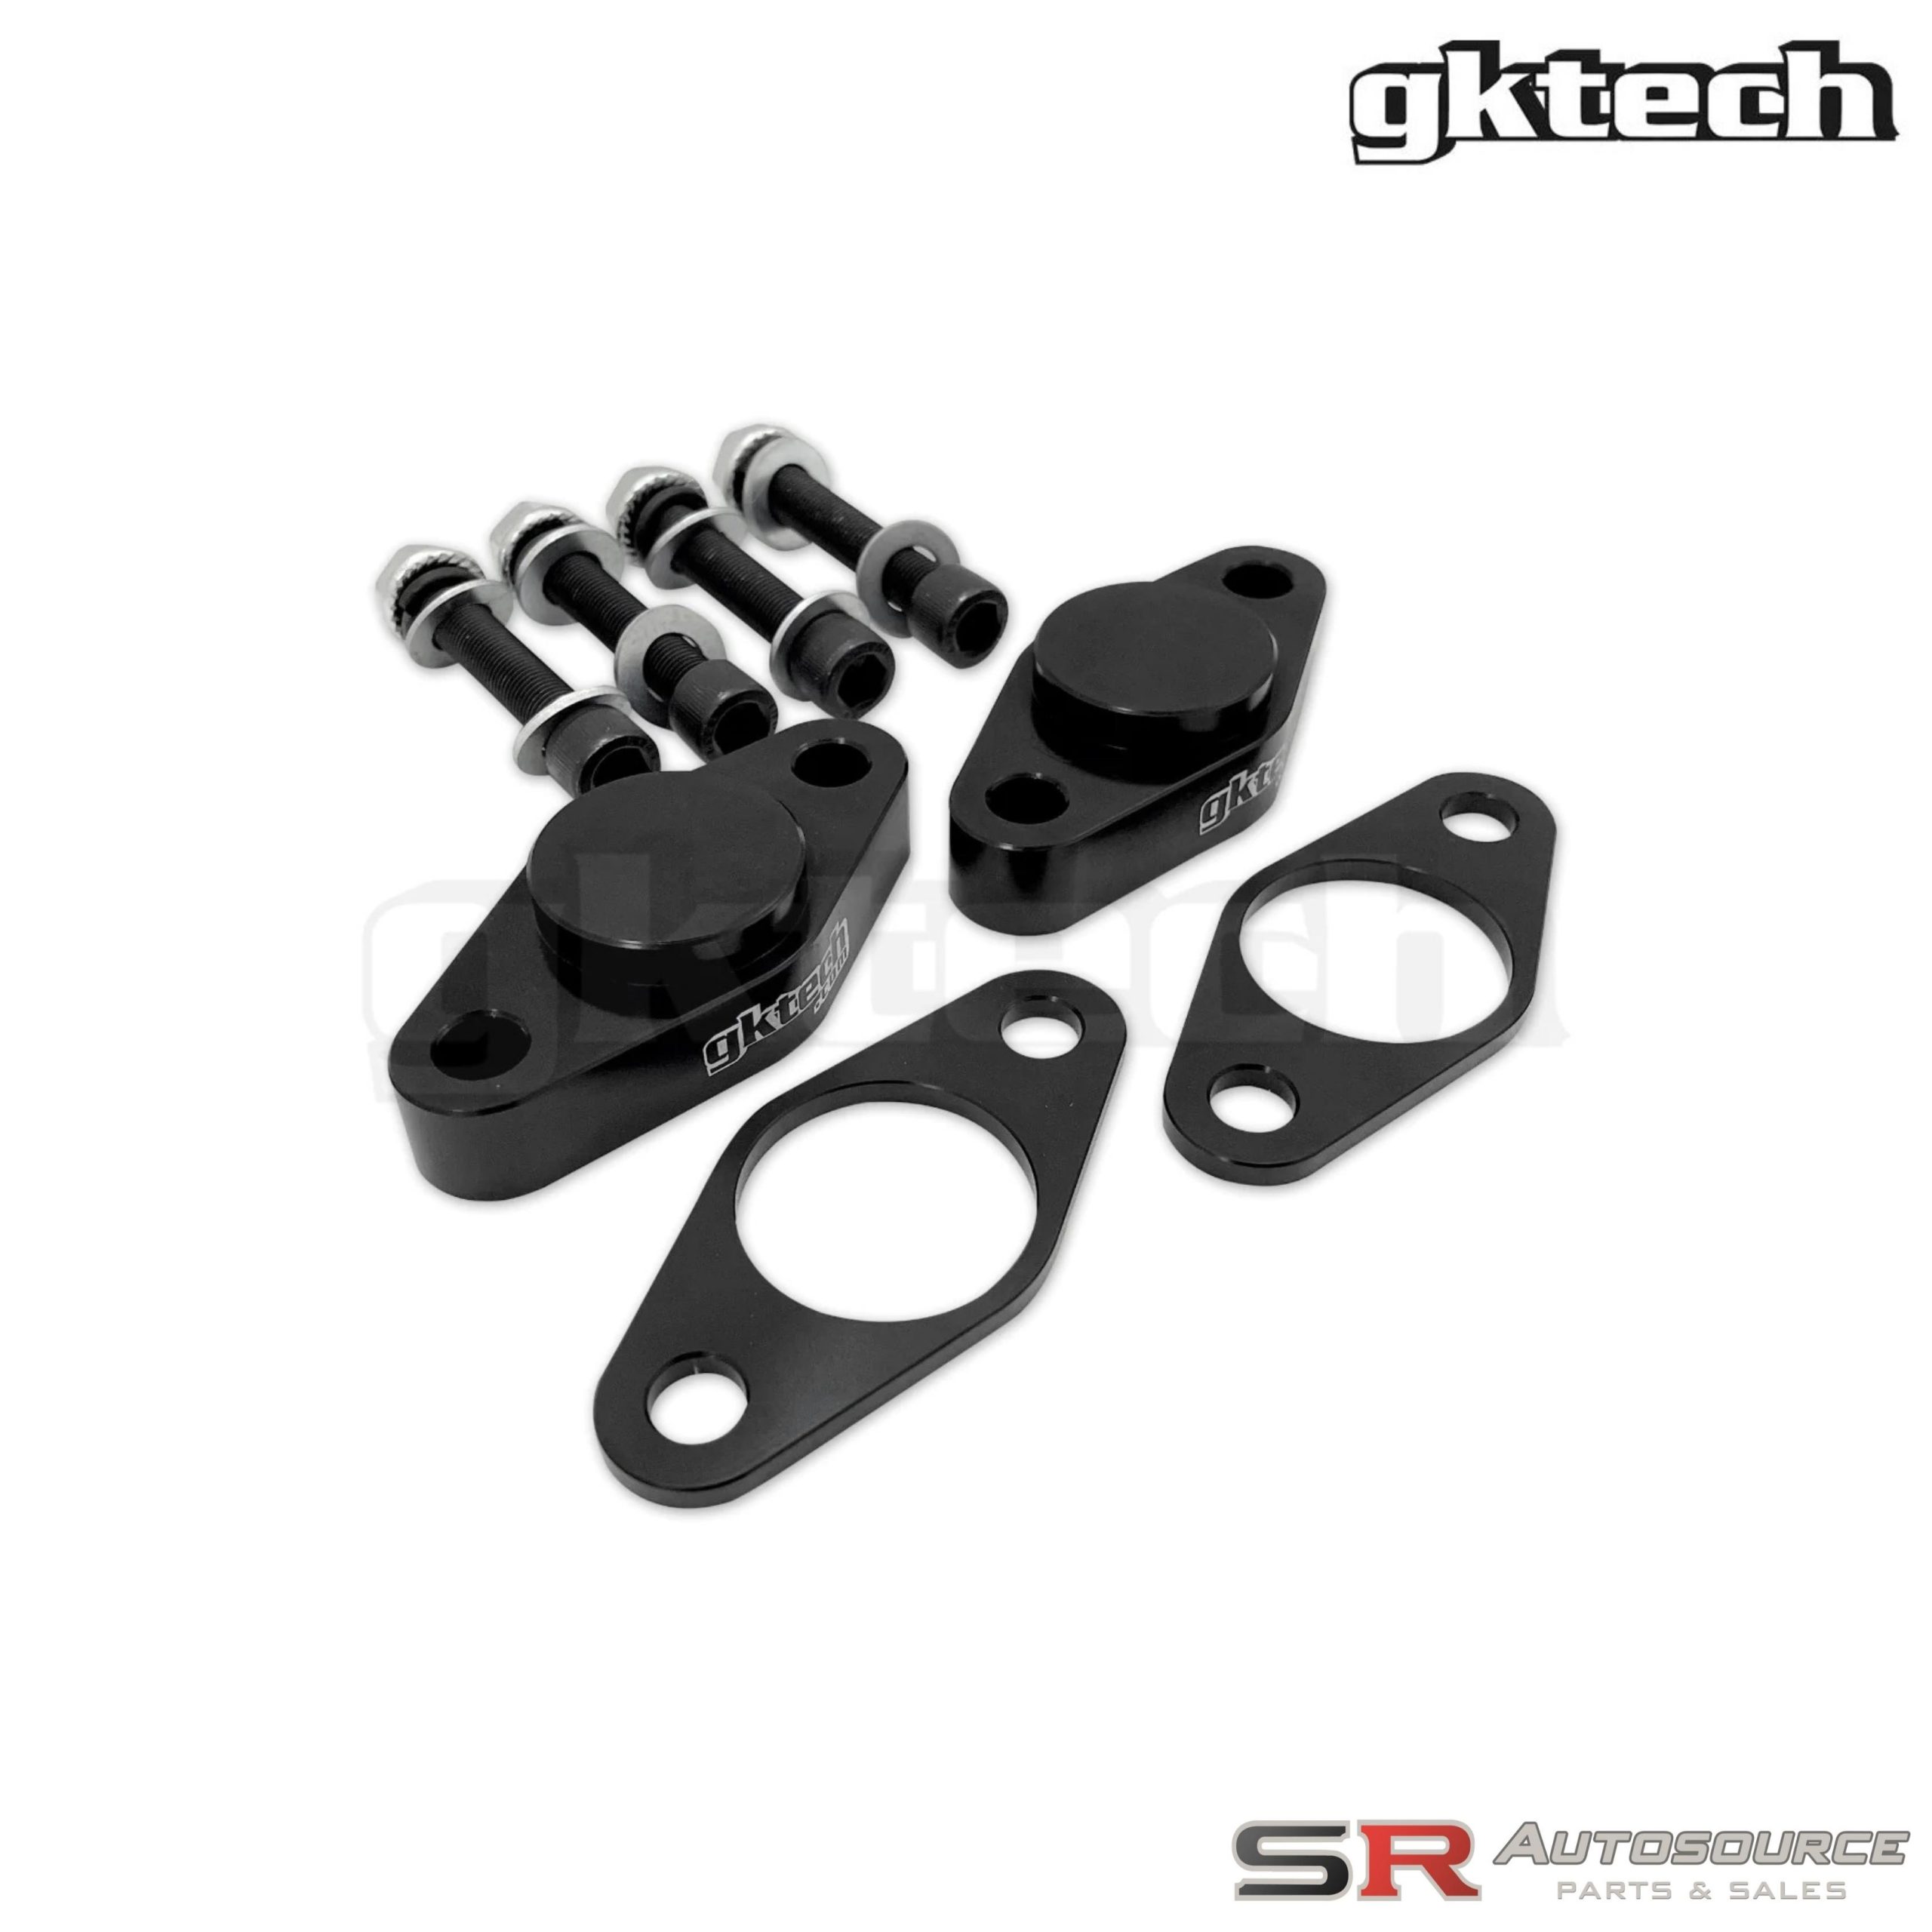 GK Tech R32/R33/R34 Front Roll Centre Adjusters